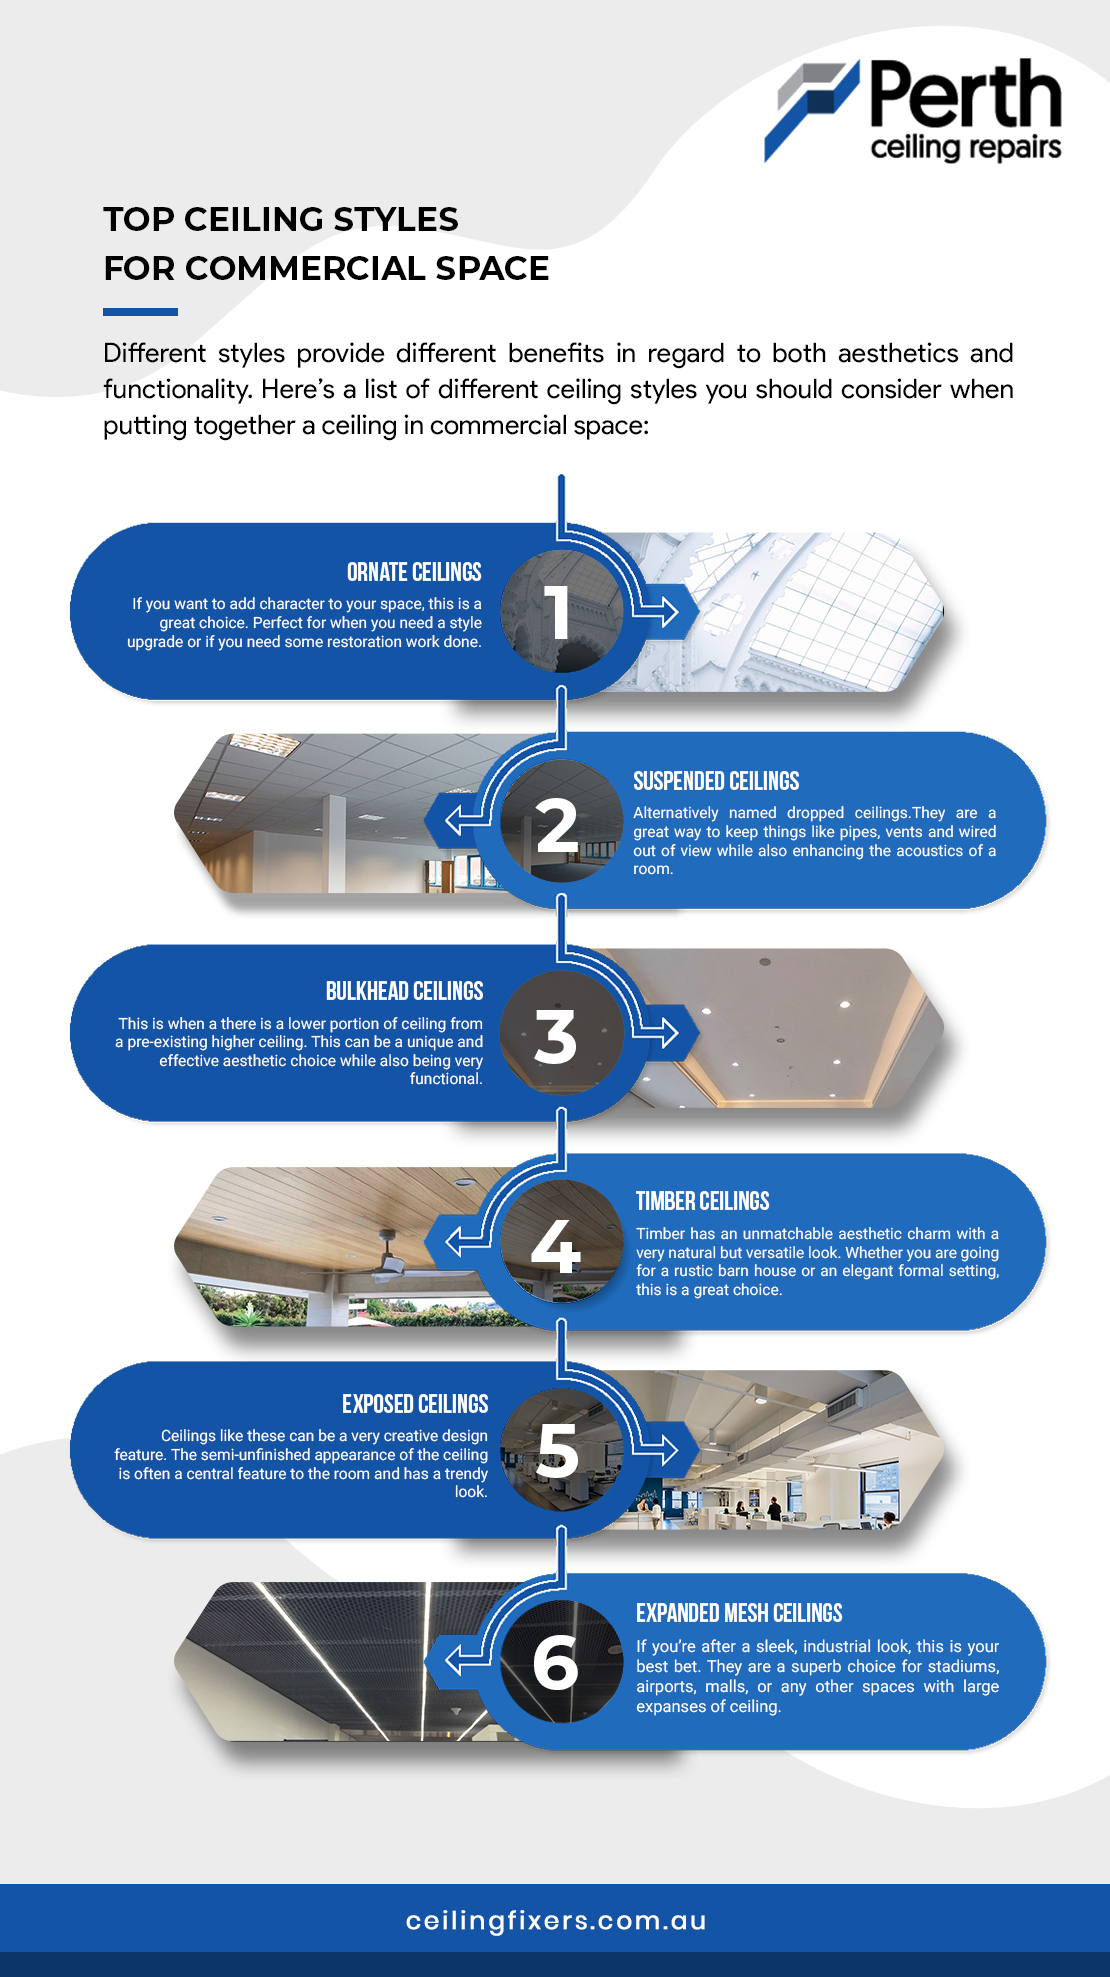 Top Ceiling Styles for Commercial Space (infographic)